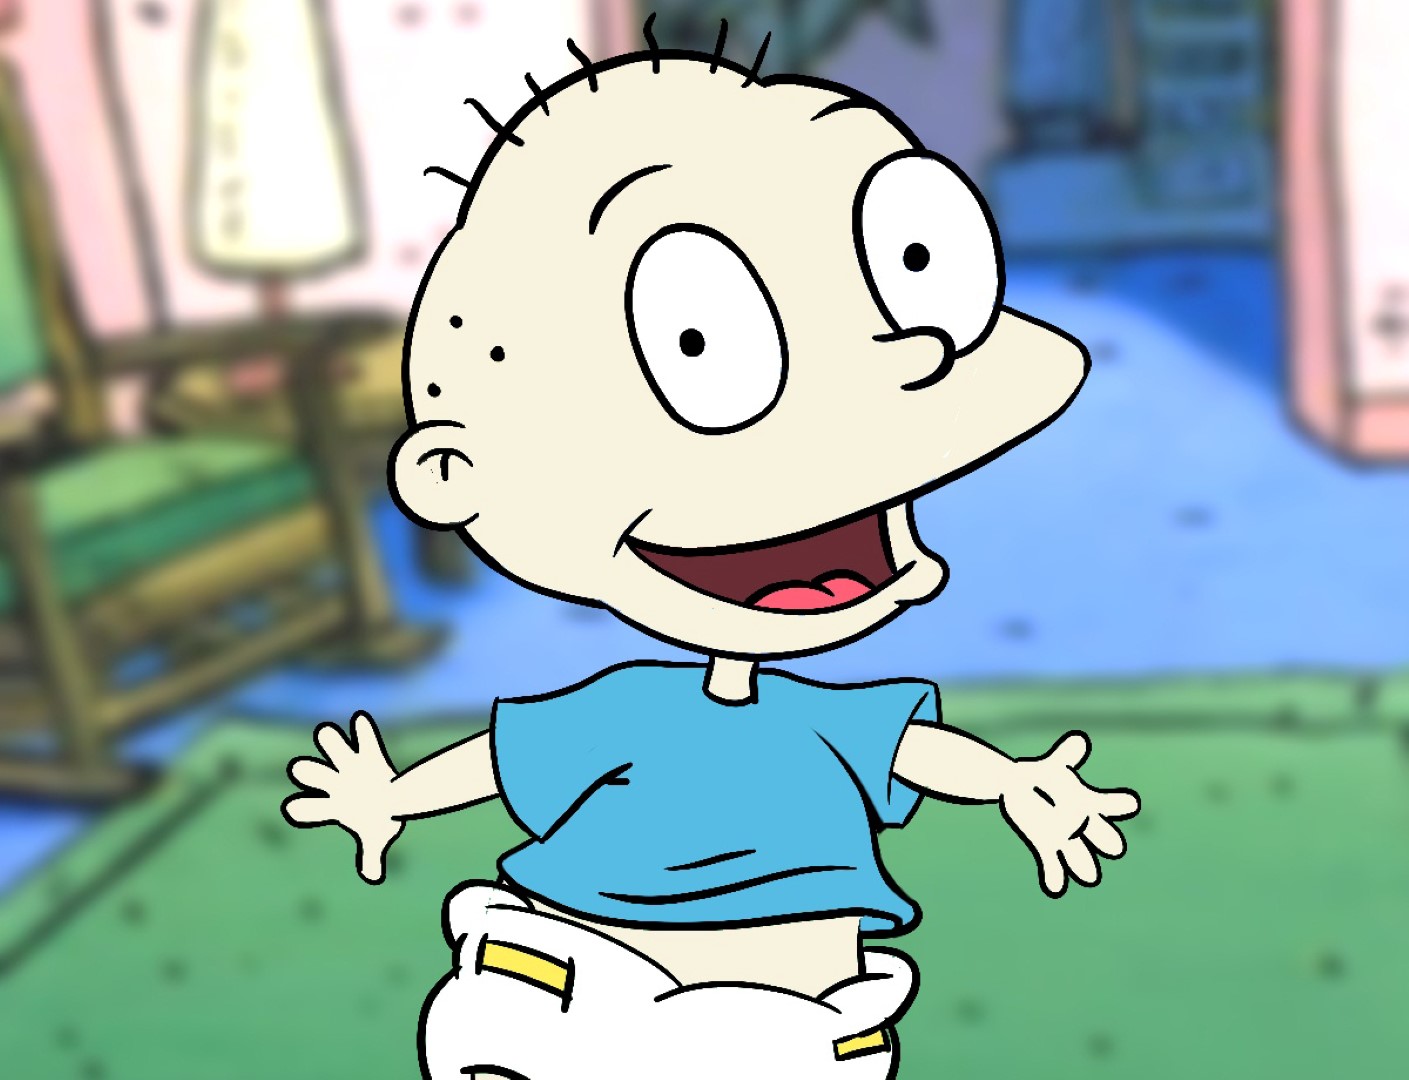 Today I'll be showing you how to draw Tommy Pickles from the class...